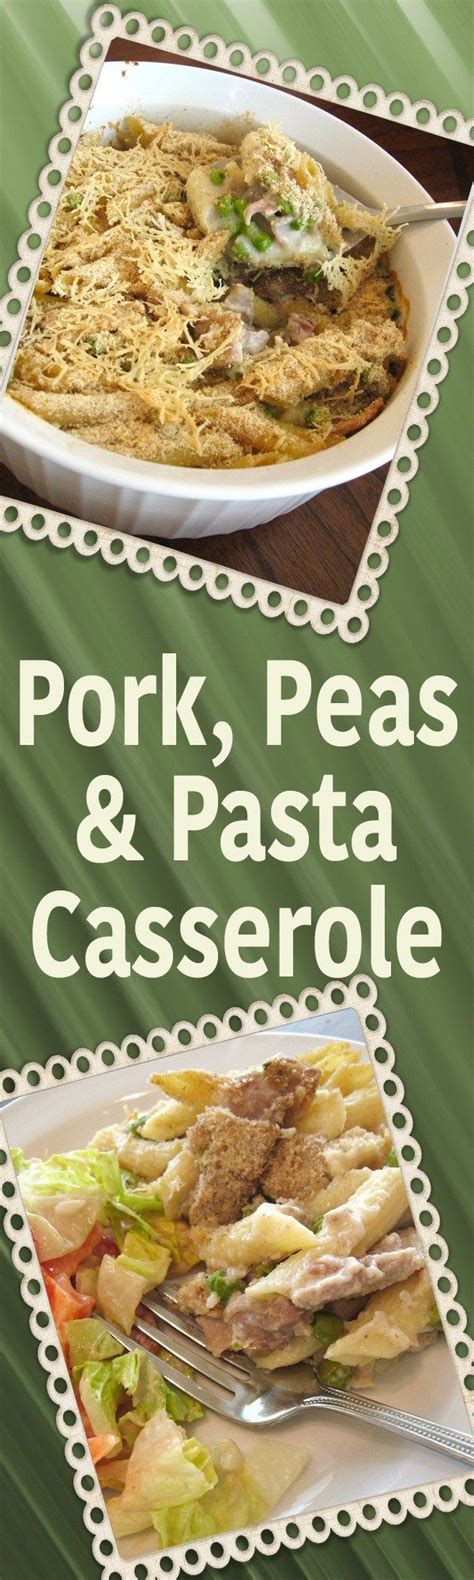 Elegant but easy to cook, pork tenderloin is the perfect cut of meat for all occasions, from weeknight dinners to spectacular parties. Pork, Peas & Pasta Casserole | Leftover pork recipes, Pork ...